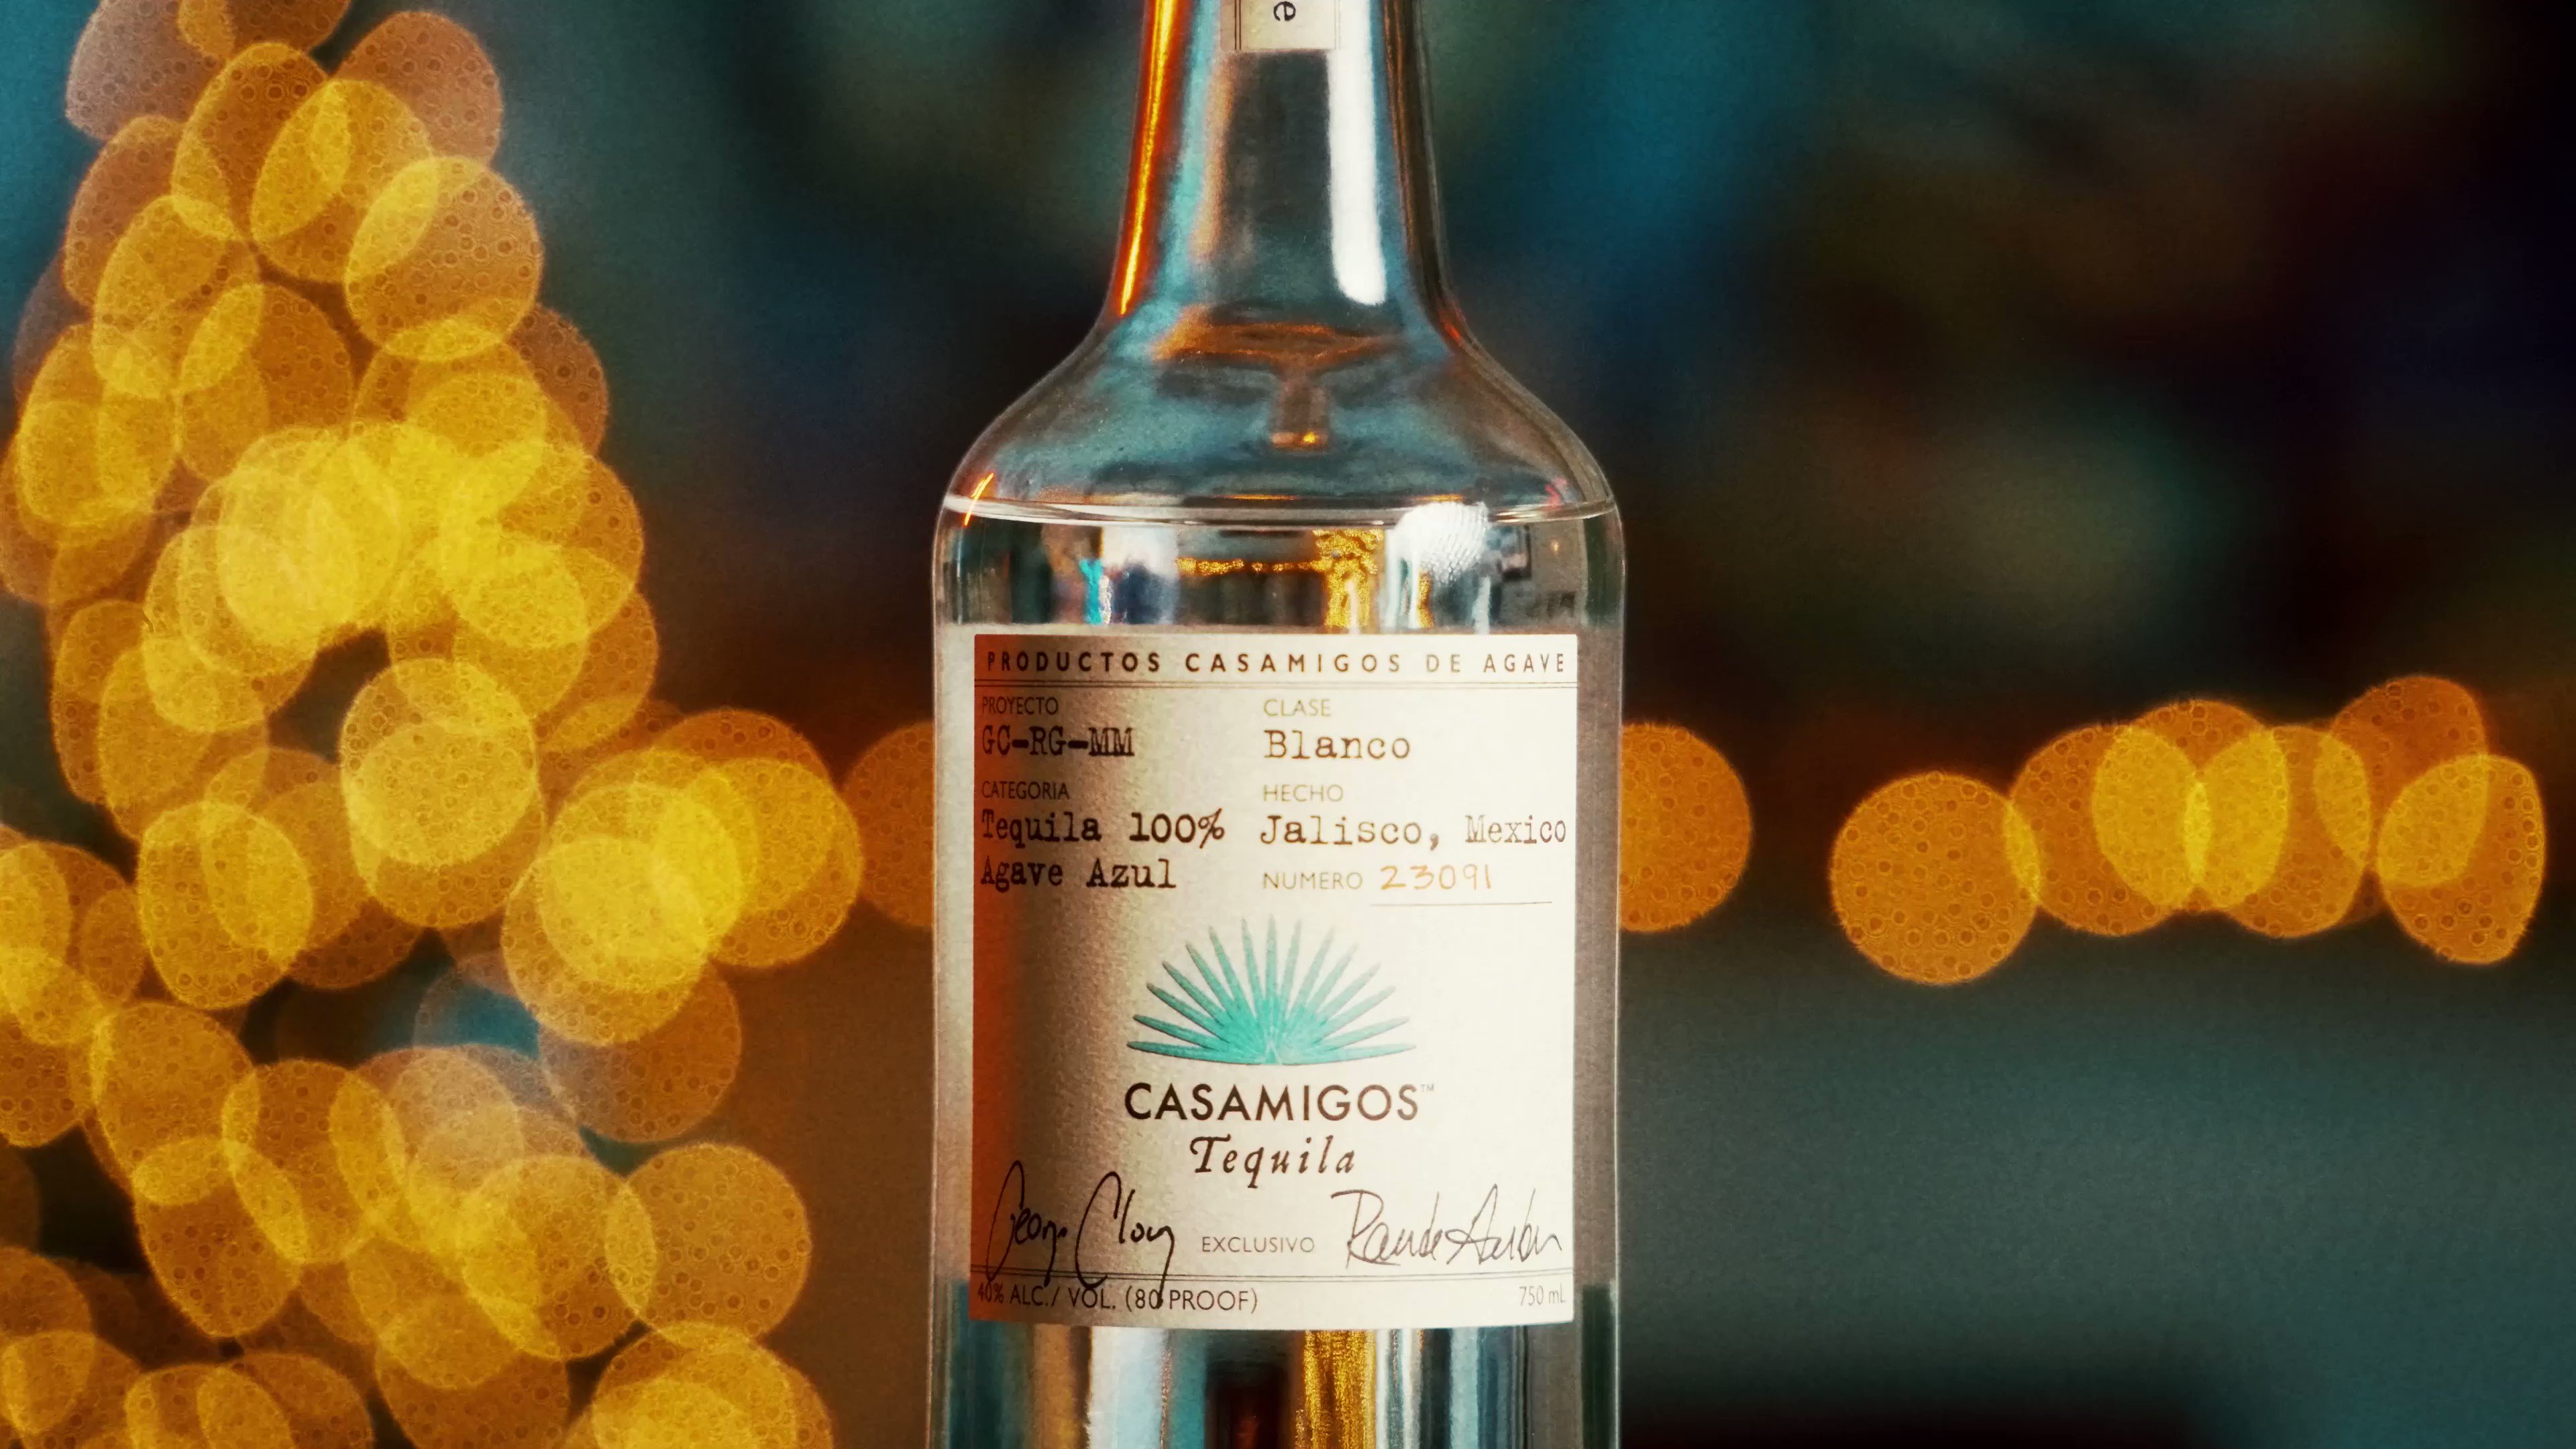 15 Casamigos Nutrition Facts - Facts.net